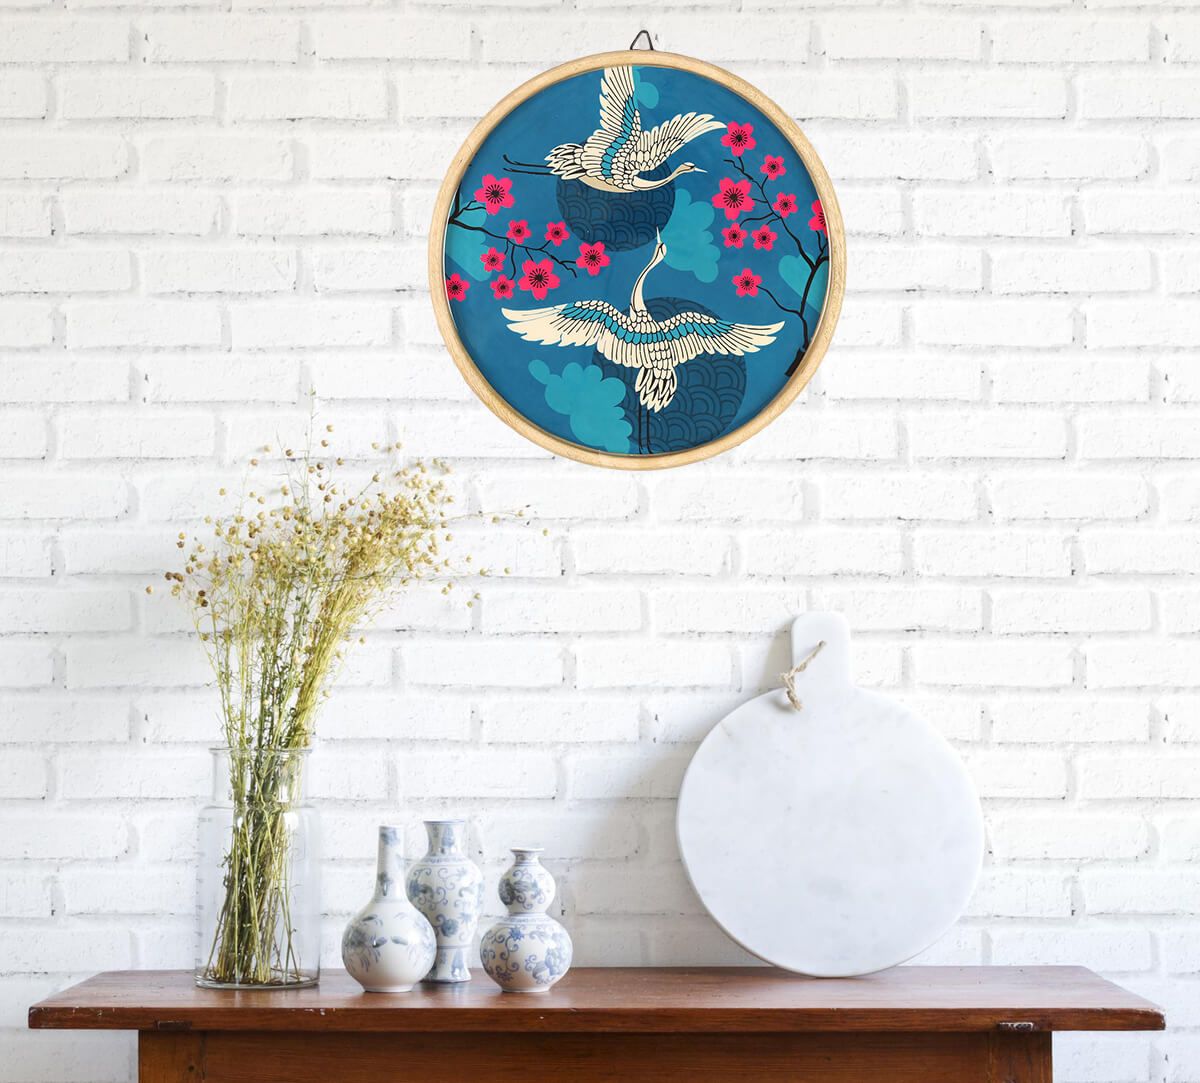 Buy Aerial Moments Decor Plate from India Circus